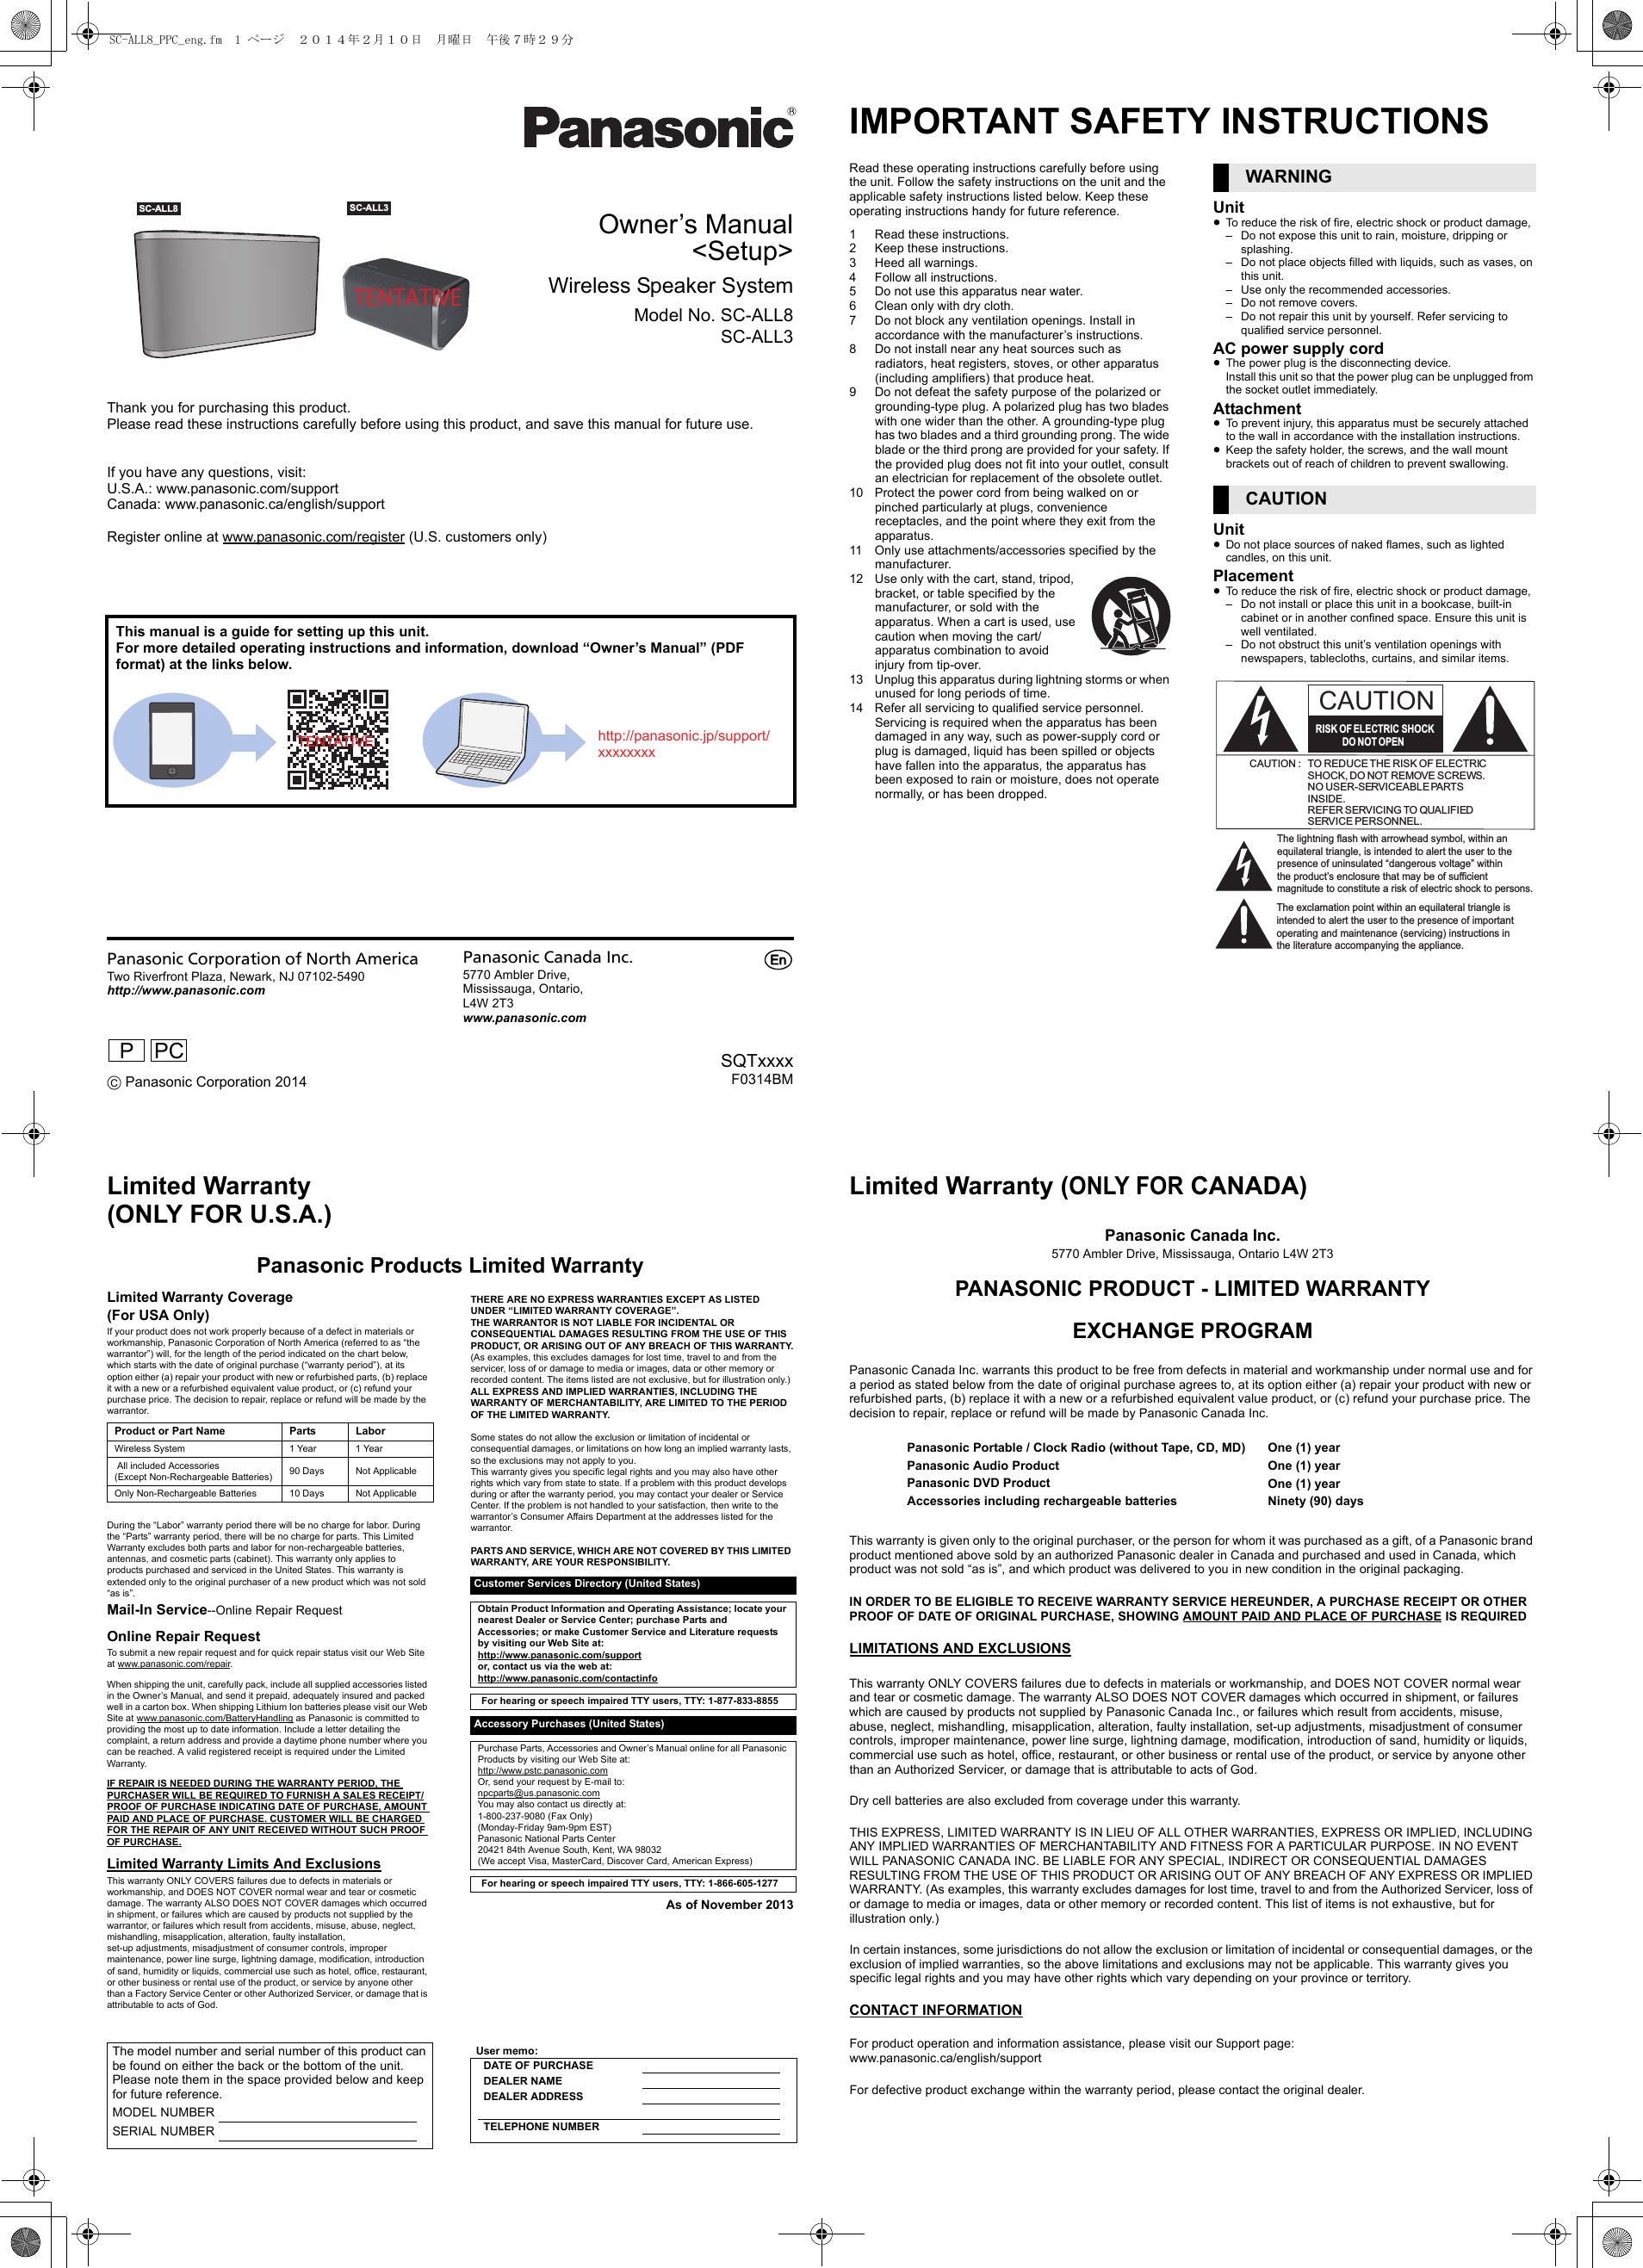 Owner’s Manual&lt;Setup&gt;Wireless Speaker SystemModel No. SC-ALL8SC-ALL3Thank you for purchasing this product.Please read these instructions carefully before using this product, and save this manual for future use.If you have any questions, visit:U.S.A.: www.panasonic.com/supportCanada: www.panasonic.ca/english/supportRegister online at www.panasonic.com/register (U.S. customers only)This manual is a guide for setting up this unit.For more detailed operating instructions and information, download “Owner’s Manual” (PDF format) at the links below.Panasonic Corporation of North AmericaTwo Riverfront Plaza, Newark, NJ 07102-5490http://www.panasonic.com C Panasonic Corporation 2014Panasonic Canada Inc.5770 Ambler Drive,Mississauga, Ontario,L4W 2T3www.panasonic.comSQTxxxxF0314BMTENTATIVE SC-ALL8   SC-ALL3 TENTATIVEhttp://panasonic.jp/support/xxxxxxxxPPCpIMPORTANT SAFETY INSTRUCTIONSRead these operating instructions carefully before using the unit. Follow the safety instructions on the unit and the applicable safety instructions listed below. Keep these operating instructions handy for future reference.1 Read these instructions.2 Keep these instructions.3 Heed all warnings.4 Follow all instructions.5 Do not use this apparatus near water.6 Clean only with dry cloth.7 Do not block any ventilation openings. Install in accordance with the manufacturer’s instructions.8 Do not install near any heat sources such as radiators, heat registers, stoves, or other apparatus (including amplifiers) that produce heat.9 Do not defeat the safety purpose of the polarized or grounding-type plug. A polarized plug has two blades with one wider than the other. A grounding-type plug has two blades and a third grounding prong. The wide blade or the third prong are provided for your safety. If the provided plug does not fit into your outlet, consult an electrician for replacement of the obsolete outlet.10 Protect the power cord from being walked on or pinched particularly at plugs, convenience receptacles, and the point where they exit from the apparatus.11 Only use attachments/accessories specified by the manufacturer.12 Use only with the cart, stand, tripod, bracket, or table specified by the manufacturer, or sold with the apparatus. When a cart is used, use caution when moving the cart/apparatus combination to avoid injury from tip-over.13 Unplug this apparatus during lightning storms or when unused for long periods of time.14 Refer all servicing to qualified service personnel. Servicing is required when the apparatus has been damaged in any way, such as power-supply cord or plug is damaged, liquid has been spilled or objects have fallen into the apparatus, the apparatus has been exposed to rain or moisture, does not operate normally, or has been dropped.Unit≥To reduce the risk of fire, electric shock or product damage,– Do not expose this unit to rain, moisture, dripping or splashing.– Do not place objects filled with liquids, such as vases, on this unit.– Use only the recommended accessories.– Do not remove covers.– Do not repair this unit by yourself. Refer servicing to qualified service personnel.AC power supply cord≥The power plug is the disconnecting device.Install this unit so that the power plug can be unplugged from the socket outlet immediately.Attachment≥To prevent injury, this apparatus must be securely attached to the wall in accordance with the installation instructions.≥Keep the safety holder, the screws, and the wall mount brackets out of reach of children to prevent swallowing.Unit≥Do not place sources of naked flames, such as lighted candles, on this unit.Placement≥To reduce the risk of fire, electric shock or product damage,– Do not install or place this unit in a bookcase, built-in cabinet or in another confined space. Ensure this unit is well ventilated.– Do not obstruct this unit’s ventilation openings with newspapers, tablecloths, curtains, and similar items.WARNINGCAUTIONThe lightning flash with arrowhead symbol, within an equilateral triangle, is intended to alert the user to the presence of uninsulated “dangerous voltage” within the product’s enclosure that may be of sufficient magnitude to constitute a risk of electric shock to persons.CAUTIONCAUTION : TO REDUCE THE RISK OF ELECTRICSHOCK, DO NOT REMOVE SCREWS.NO USER-SERVICEABLE PARTSINSIDE.REFER SERVICING TO QUALIFIEDSERVICE PERSONNEL.The exclamation point within an equilateral triangle is intended to alert the user to the presence of important operating and maintenance (servicing) instructions in the literature accompanying the appliance.RISK OF ELECTRIC SHOCKDO  NOT OPENLimited Warranty (ONLY FOR U.S.A.)Panasonic Products Limited WarrantyLimited Warranty Coverage(For USA Only)If your product does not work properly because of a defect in materials or workmanship, Panasonic Corporation of North America (referred to as “the warrantor”) will, for the length of the period indicated on the chart below, which starts with the date of original purchase (“warranty period”), at its option either (a) repair your product with new or refurbished parts, (b) replace it with a new or a refurbished equivalent value product, or (c) refund your purchase price. The decision to repair, replace or refund will be made by the warrantor.During the “Labor” warranty period there will be no charge for labor. During the “Parts” warranty period, there will be no charge for parts. This Limited Warranty excludes both parts and labor for non-rechargeable batteries, antennas, and cosmetic parts (cabinet). This warranty only applies to products purchased and serviced in the United States. This warranty is extended only to the original purchaser of a new product which was not sold “as is”.Mail-In Service--Online Repair RequestOnline Repair RequestTo submit a new repair request and for quick repair status visit our Web Site at www.panasonic.com/repair.When shipping the unit, carefully pack, include all supplied accessories listed in the Owner’s Manual, and send it prepaid, adequately insured and packed well in a carton box. When shipping Lithium Ion batteries please visit our Web Site at www.panasonic.com/BatteryHandling as Panasonic is committed to providing the most up to date information. Include a letter detailing the complaint, a return address and provide a daytime phone number where you can be reached. A valid registered receipt is required under the Limited Warranty.IF REPAIR IS NEEDED DURING THE WARRANTY PERIOD, THE PURCHASER WILL BE REQUIRED TO FURNISH A SALES RECEIPT/PROOF OF PURCHASE INDICATING DATE OF PURCHASE, AMOUNT PAID AND PLACE OF PURCHASE. CUSTOMER WILL BE CHARGED FOR THE REPAIR OF ANY UNIT RECEIVED WITHOUT SUCH PROOF OF PURCHASE.Limited Warranty Limits And ExclusionsThis warranty ONLY COVERS failures due to defects in materials or workmanship, and DOES NOT COVER normal wear and tear or cosmetic damage. The warranty ALSO DOES NOT COVER damages which occurred in shipment, or failures which are caused by products not supplied by the warrantor, or failures which result from accidents, misuse, abuse, neglect, mishandling, misapplication, alteration, faulty installation, set-up adjustments, misadjustment of consumer controls, improper maintenance, power line surge, lightning damage, modification, introduction of sand, humidity or liquids, commercial use such as hotel, office, restaurant, or other business or rental use of the product, or service by anyone other than a Factory Service Center or other Authorized Servicer, or damage that is attributable to acts of God.THERE ARE NO EXPRESS WARRANTIES EXCEPT AS LISTED UNDER “LIMITED WARRANTY COVERAGE”.THE WARRANTOR IS NOT LIABLE FOR INCIDENTAL OR CONSEQUENTIAL DAMAGES RESULTING FROM THE USE OF THIS PRODUCT, OR ARISING OUT OF ANY BREACH OF THIS WARRANTY.(As examples, this excludes damages for lost time, travel to and from the servicer, loss of or damage to media or images, data or other memory or recorded content. The items listed are not exclusive, but for illustration only.)ALL EXPRESS AND IMPLIED WARRANTIES, INCLUDING THE WARRANTY OF MERCHANTABILITY, ARE LIMITED TO THE PERIOD OF THE LIMITED WARRANTY.Some states do not allow the exclusion or limitation of incidental or consequential damages, or limitations on how long an implied warranty lasts, so the exclusions may not apply to you.This warranty gives you specific legal rights and you may also have other rights which vary from state to state. If a problem with this product develops during or after the warranty period, you may contact your dealer or Service Center. If the problem is not handled to your satisfaction, then write to the warrantor’s Consumer Affairs Department at the addresses listed for the warrantor.PARTS AND SERVICE, WHICH ARE NOT COVERED BY THIS LIMITED WARRANTY, ARE YOUR RESPONSIBILITY.As of November 2013Product or Part Name Parts LaborWireless System 1 Year 1 Year All included Accessories(Except Non-Rechargeable Batteries) 90 Days Not ApplicableOnly Non-Rechargeable Batteries 10 Days Not ApplicableCustomer Services Directory (United States)Obtain Product Information and Operating Assistance; locate your nearest Dealer or Service Center; purchase Parts and Accessories; or make Customer Service and Literature requests by visiting our Web Site at:http://www.panasonic.com/supportor, contact us via the web at:http://www.panasonic.com/contactinfoFor hearing or speech impaired TTY users, TTY: 1-877-833-8855 Accessory Purchases (United States)Purchase Parts, Accessories and Owner’s Manual online for all Panasonic Products by visiting our Web Site at:http://www.pstc.panasonic.comOr, send your request by E-mail to:npcparts@us.panasonic.comYou may also contact us directly at:1-800-237-9080 (Fax Only)(Monday-Friday 9am-9pm EST)Panasonic National Parts Center20421 84th Avenue South, Kent, WA 98032(We accept Visa, MasterCard, Discover Card, American Express)For hearing or speech impaired TTY users, TTY: 1-866-605-1277 The model number and serial number of this product can be found on either the back or the bottom of the unit.Please note them in the space provided below and keep for future reference.MODEL NUMBERSERIAL NUMBERUser memo:DATE OF PURCHASEDEALER NAMEDEALER ADDRESSTELEPHONE NUMBERLimited Warranty (ONLY FOR CANADA)Panasonic Canada Inc.5770 Ambler Drive, Mississauga, Ontario L4W 2T3PANASONIC PRODUCT - LIMITED WARRANTYEXCHANGE PROGRAMPanasonic Canada Inc. warrants this product to be free from defects in material and workmanship under normal use and for a period as stated below from the date of original purchase agrees to, at its option either (a) repair your product with new or refurbished parts, (b) replace it with a new or a refurbished equivalent value product, or (c) refund your purchase price. The decision to repair, replace or refund will be made by Panasonic Canada Inc.This warranty is given only to the original purchaser, or the person for whom it was purchased as a gift, of a Panasonic brand product mentioned above sold by an authorized Panasonic dealer in Canada and purchased and used in Canada, which product was not sold “as is”, and which product was delivered to you in new condition in the original packaging.IN ORDER TO BE ELIGIBLE TO RECEIVE WARRANTY SERVICE HEREUNDER, A PURCHASE RECEIPT OR OTHER PROOF OF DATE OF ORIGINAL PURCHASE, SHOWING AMOUNT PAID AND PLACE OF PURCHASE IS REQUIREDLIMITATIONS AND EXCLUSIONSThis warranty ONLY COVERS failures due to defects in materials or workmanship, and DOES NOT COVER normal wear and tear or cosmetic damage. The warranty ALSO DOES NOT COVER damages which occurred in shipment, or failures which are caused by products not supplied by Panasonic Canada Inc., or failures which result from accidents, misuse, abuse, neglect, mishandling, misapplication, alteration, faulty installation, set-up adjustments, misadjustment of consumer controls, improper maintenance, power line surge, lightning damage, modification, introduction of sand, humidity or liquids, commercial use such as hotel, office, restaurant, or other business or rental use of the product, or service by anyone other than an Authorized Servicer, or damage that is attributable to acts of God.Dry cell batteries are also excluded from coverage under this warranty.THIS EXPRESS, LIMITED WARRANTY IS IN LIEU OF ALL OTHER WARRANTIES, EXPRESS OR IMPLIED, INCLUDING ANY IMPLIED WARRANTIES OF MERCHANTABILITY AND FITNESS FOR A PARTICULAR PURPOSE. IN NO EVENT WILL PANASONIC CANADA INC. BE LIABLE FOR ANY SPECIAL, INDIRECT OR CONSEQUENTIAL DAMAGES RESULTING FROM THE USE OF THIS PRODUCT OR ARISING OUT OF ANY BREACH OF ANY EXPRESS OR IMPLIED WARRANTY. (As examples, this warranty excludes damages for lost time, travel to and from the Authorized Servicer, loss of or damage to media or images, data or other memory or recorded content. This list of items is not exhaustive, but for illustration only.)In certain instances, some jurisdictions do not allow the exclusion or limitation of incidental or consequential damages, or the exclusion of implied warranties, so the above limitations and exclusions may not be applicable. This warranty gives you specific legal rights and you may have other rights which vary depending on your province or territory.CONTACT INFORMATIONPanasonic Portable / Clock Radio (without Tape, CD, MD)Panasonic Audio ProductPanasonic DVD ProductAccessories including rechargeable batteriesOne (1) yearOne (1) yearOne (1) yearNinety (90) daysFor product operation and information assistance, please visit our Support page:www.panasonic.ca/english/supportFor defective product exchange within the warranty period, please contact the original dealer.SC-ALL8_PPC_eng.fm  1 ページ  ２０１４年２月１０日　月曜日　午後７時２９分